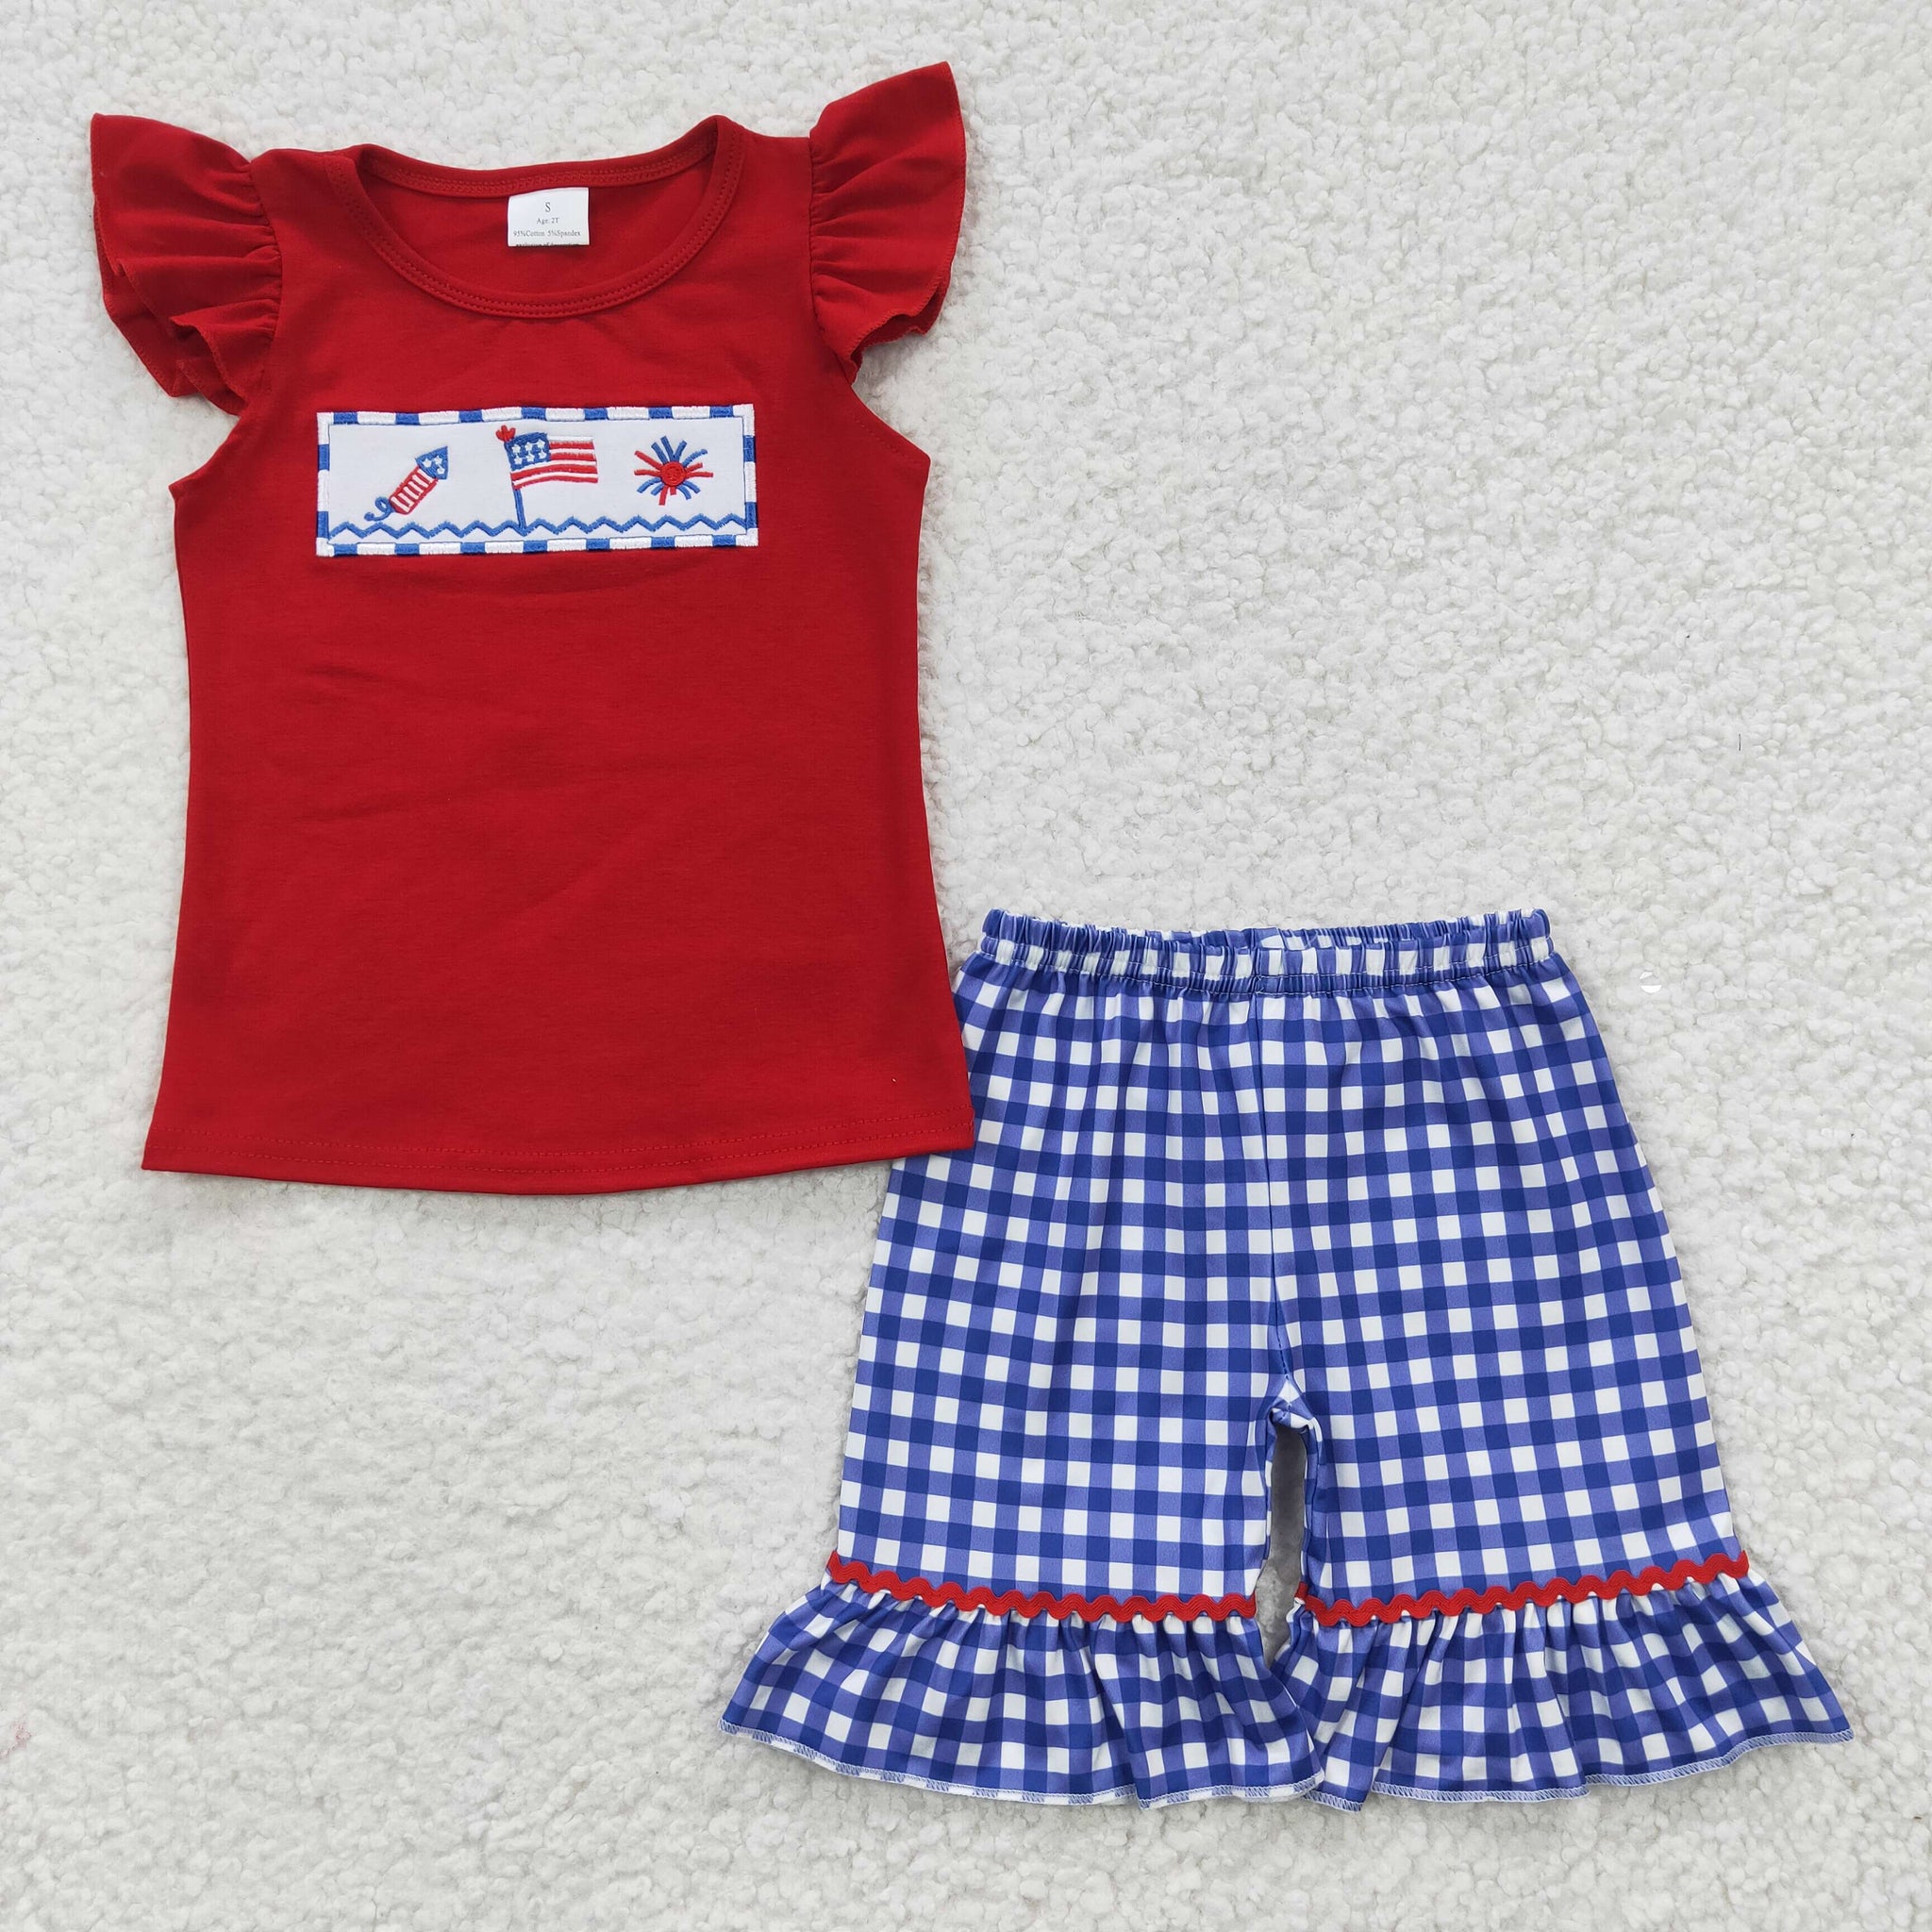 GSSO0193 kids clothes girks july 4th embroidery patriotic outfit